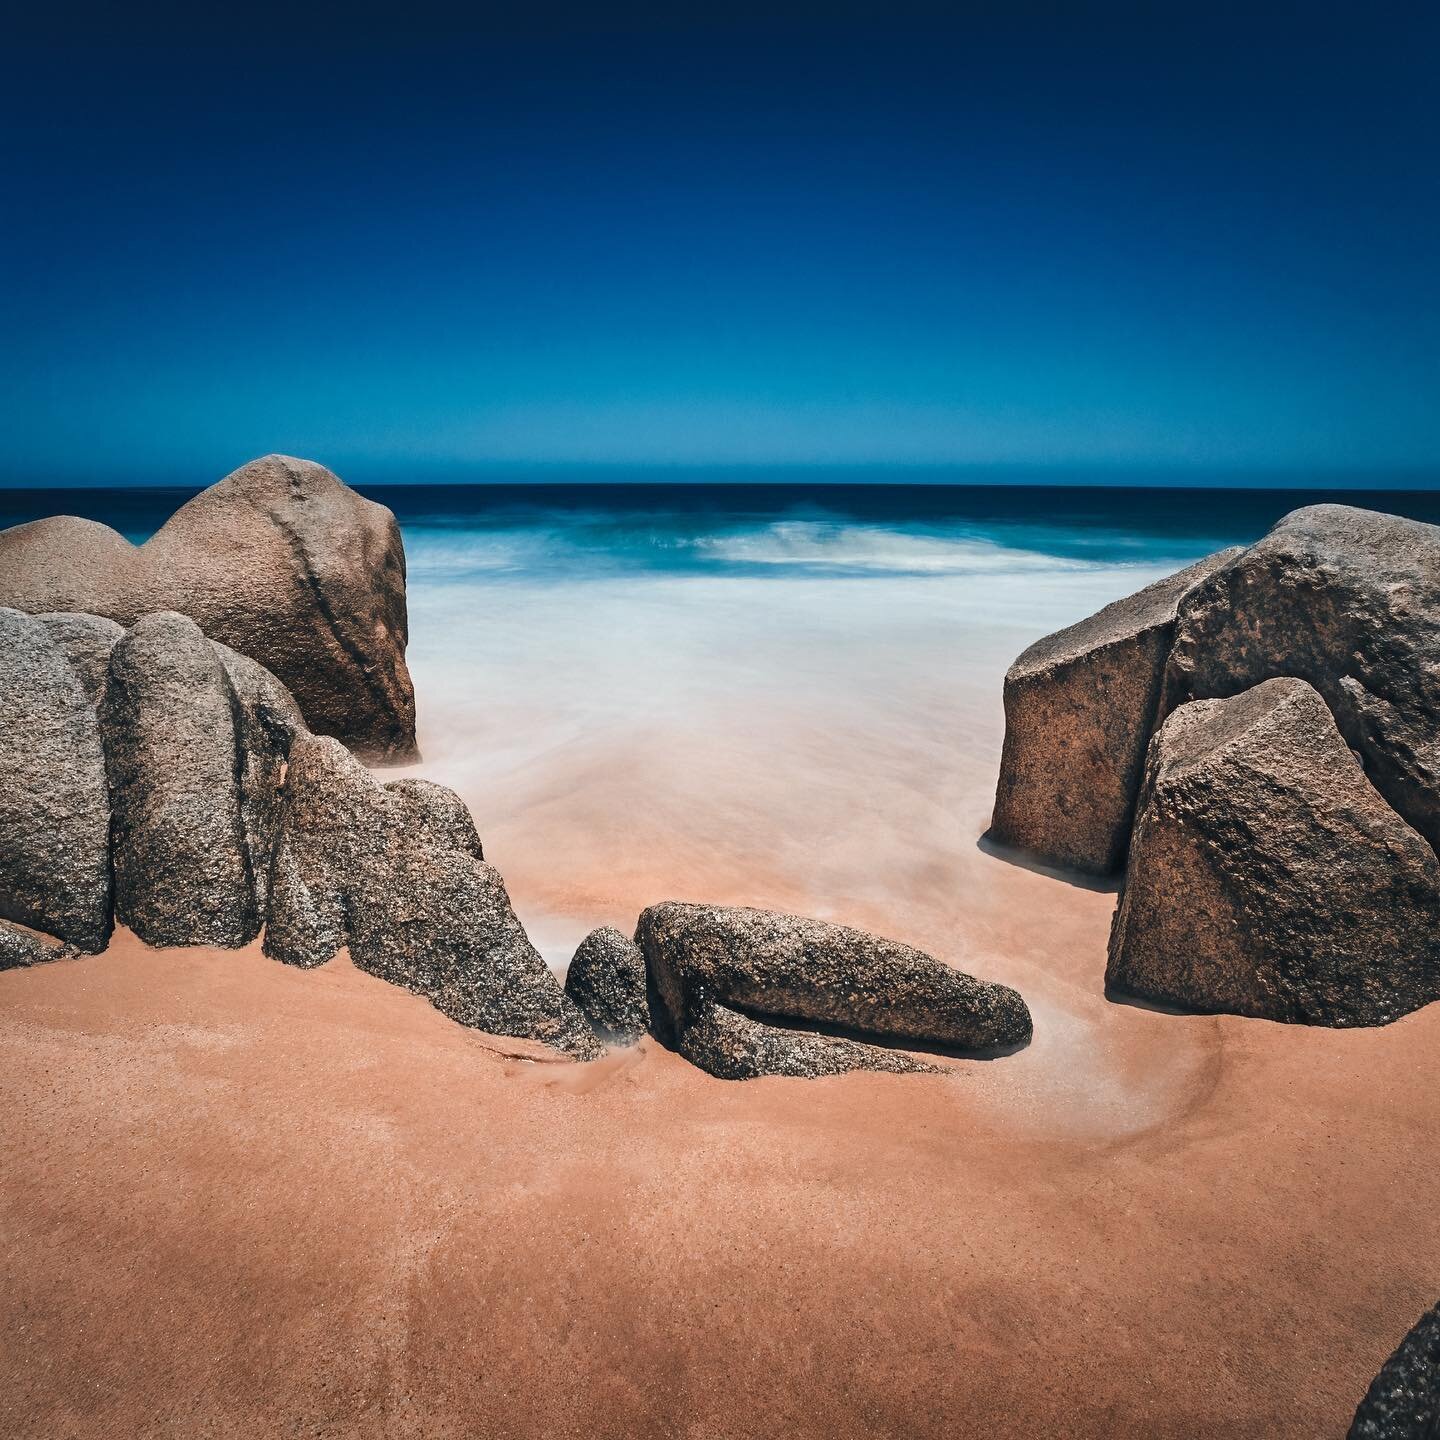 The serene waters of Divorce Beach in Los Cabo&rsquo;s San Lucas in Baja California Mexico&hellip; #Mexico #Cabo #divorcebeach #ocean #bajacalifornia #leefilters #cabosanlucas #landscape #photography #landscapephotography #travel #beautiful #art